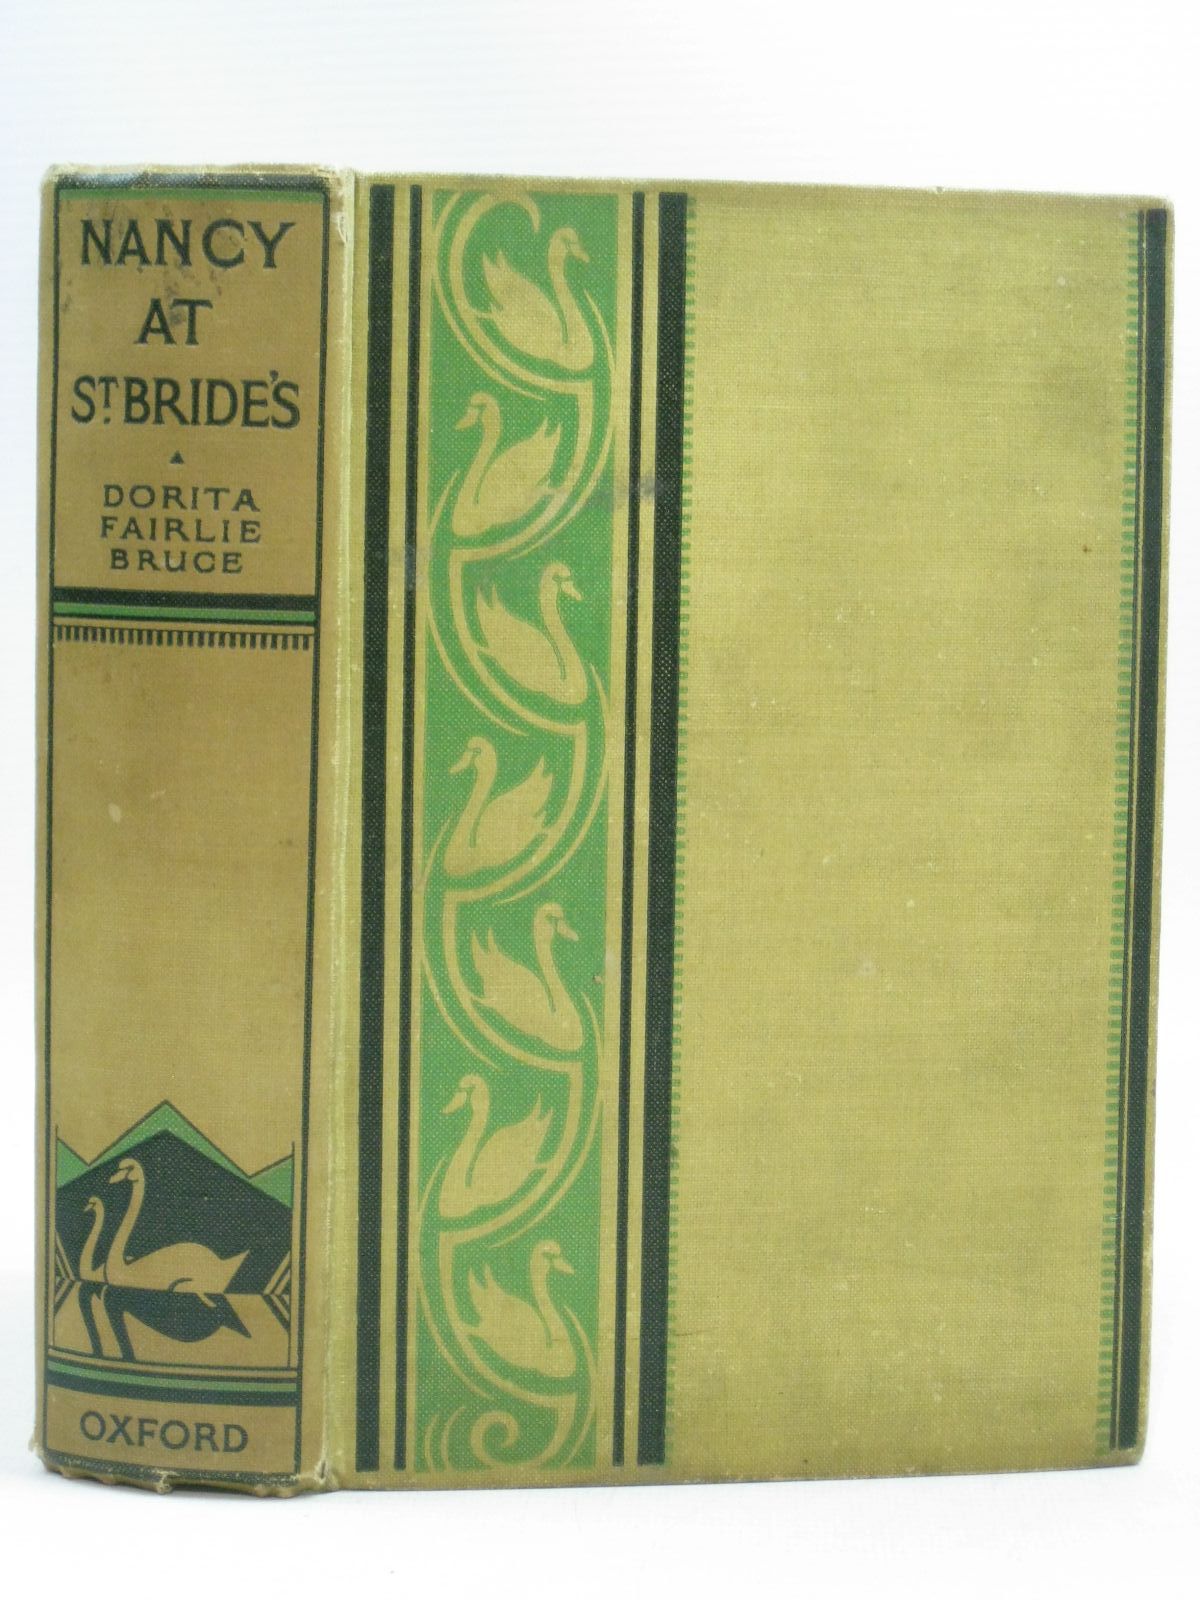 Photo of NANCY AT ST. BRIDE'S written by Bruce, Dorita Fairlie illustrated by Johnston, M.D. published by Oxford University Press, Humphrey Milford (STOCK CODE: 1404138)  for sale by Stella & Rose's Books